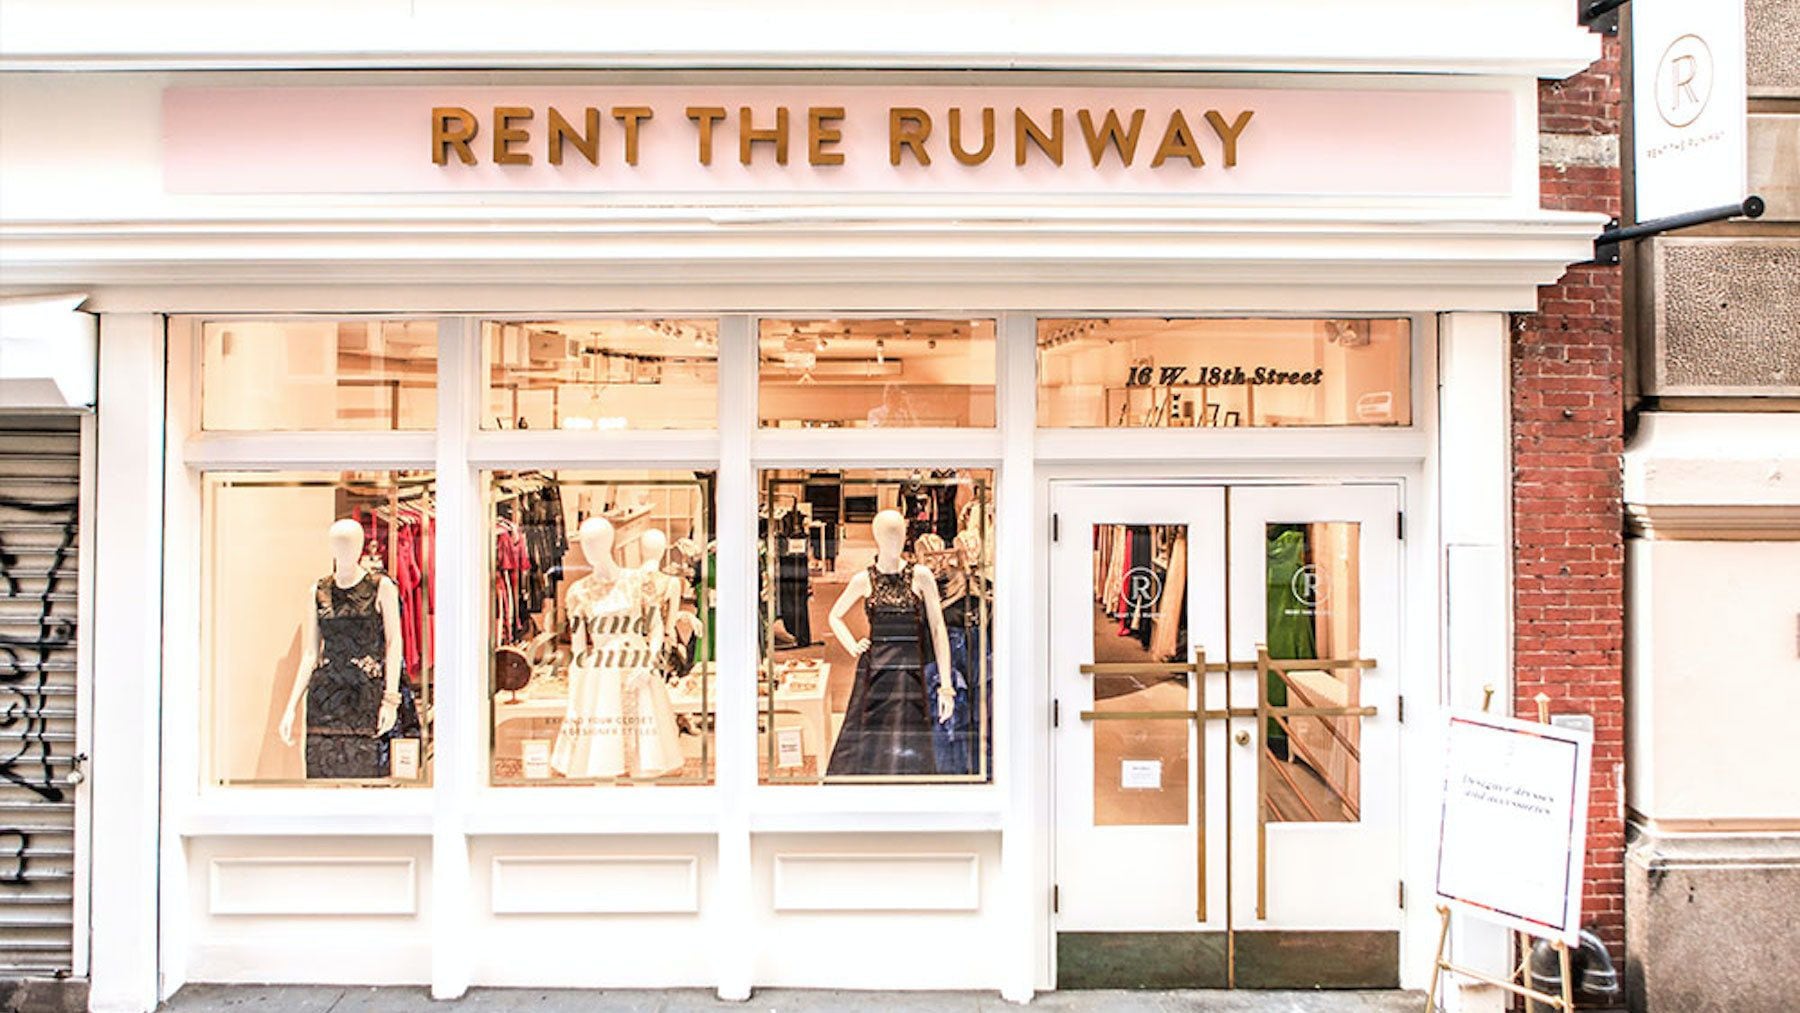 Rent the Runway Shares Get Caught Up in AI Frenzy, Surge Over 200%